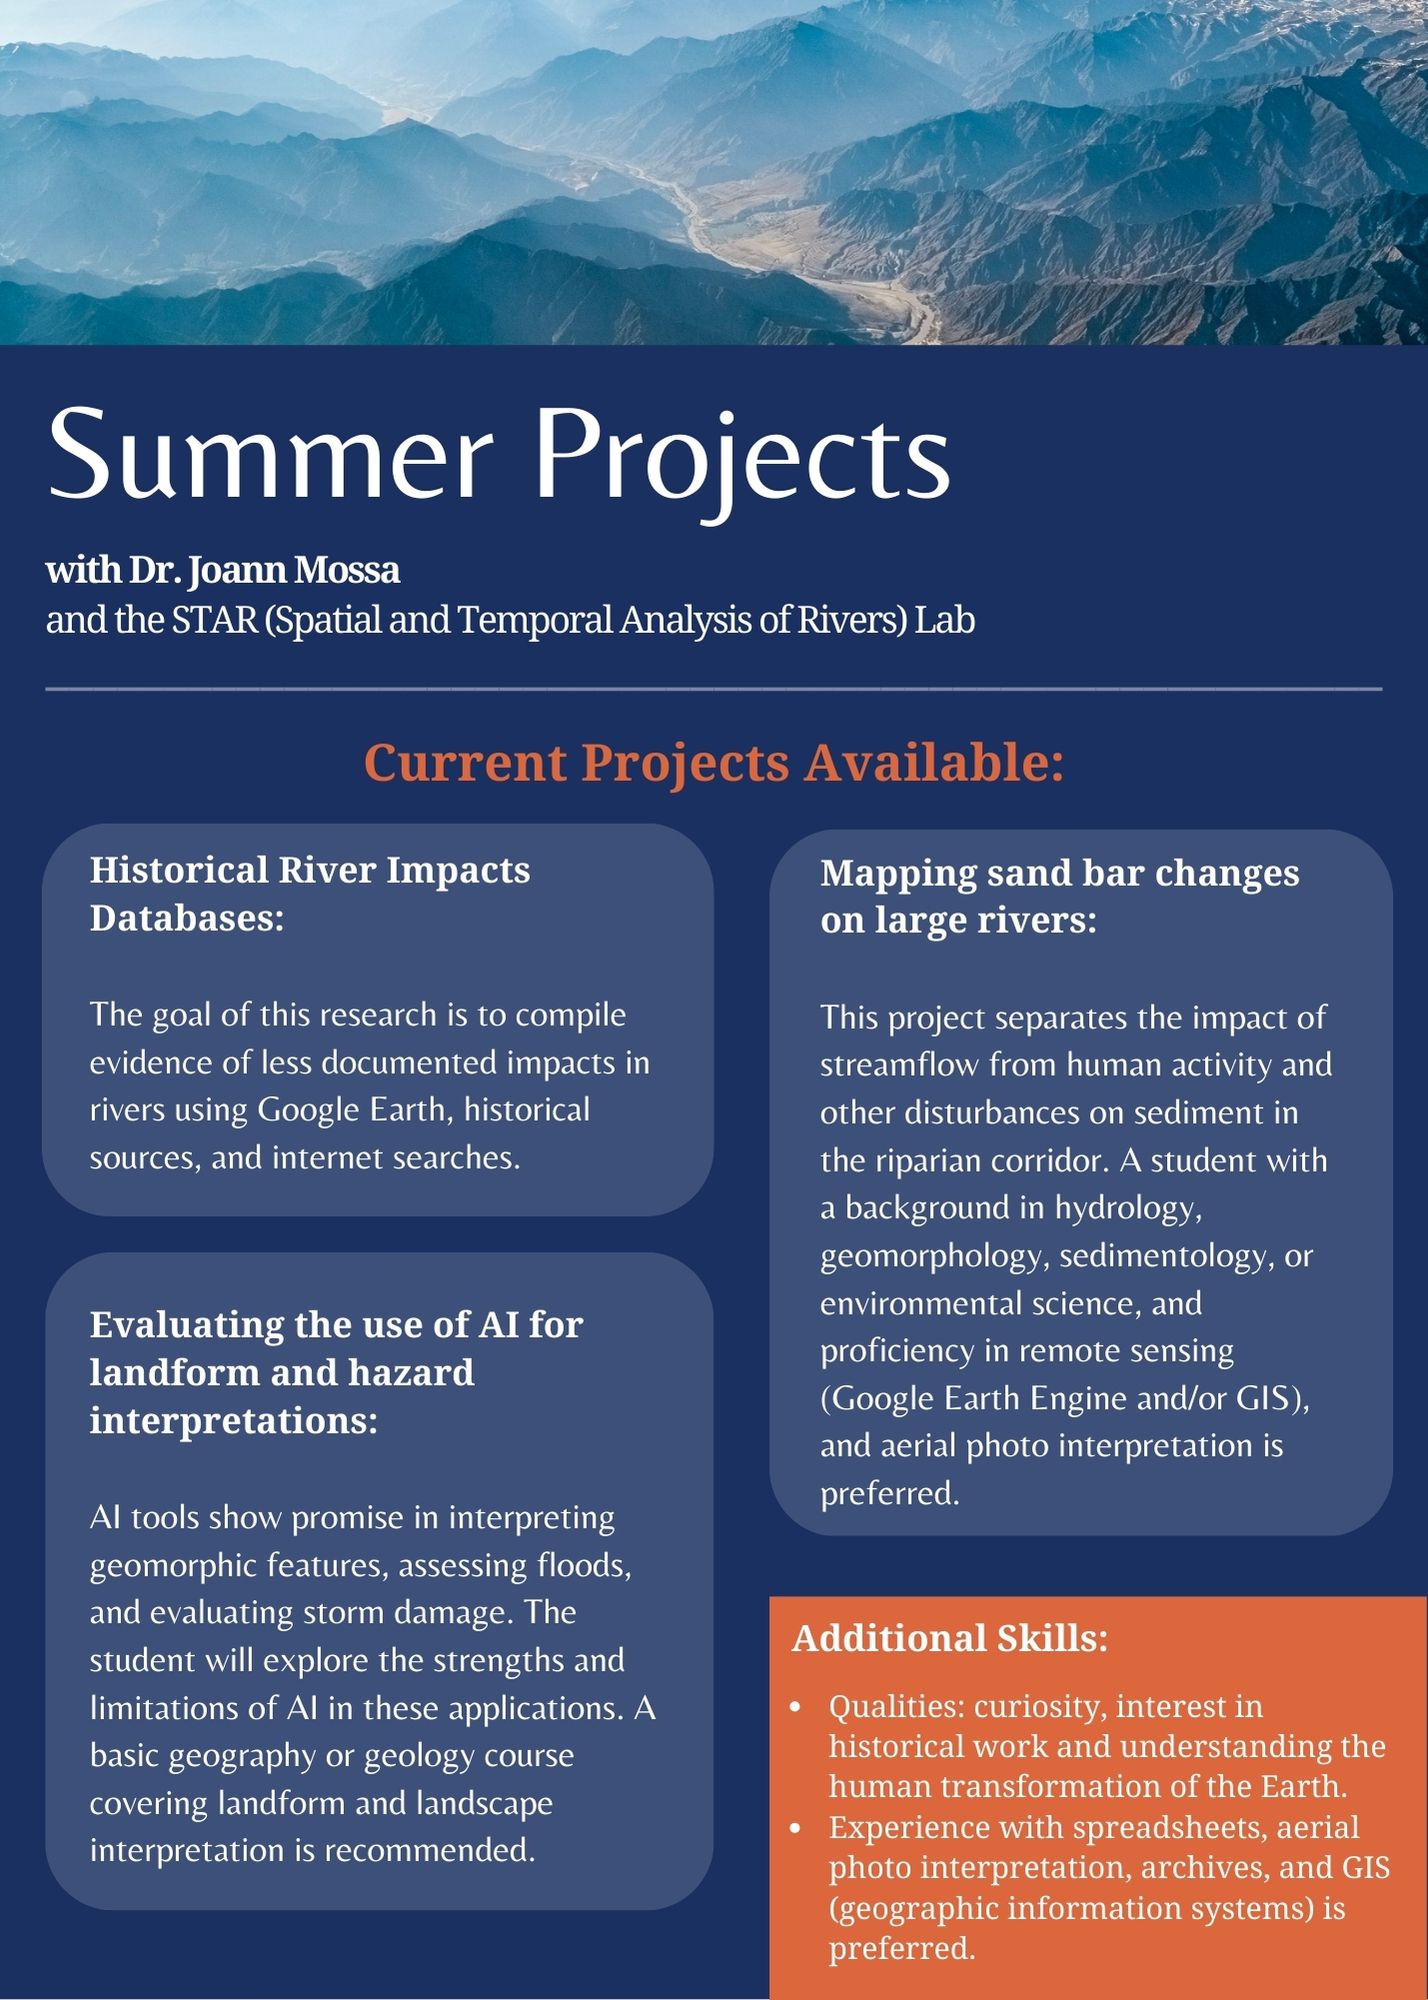 Summer 24' research projects with Dr. Joann Mossa